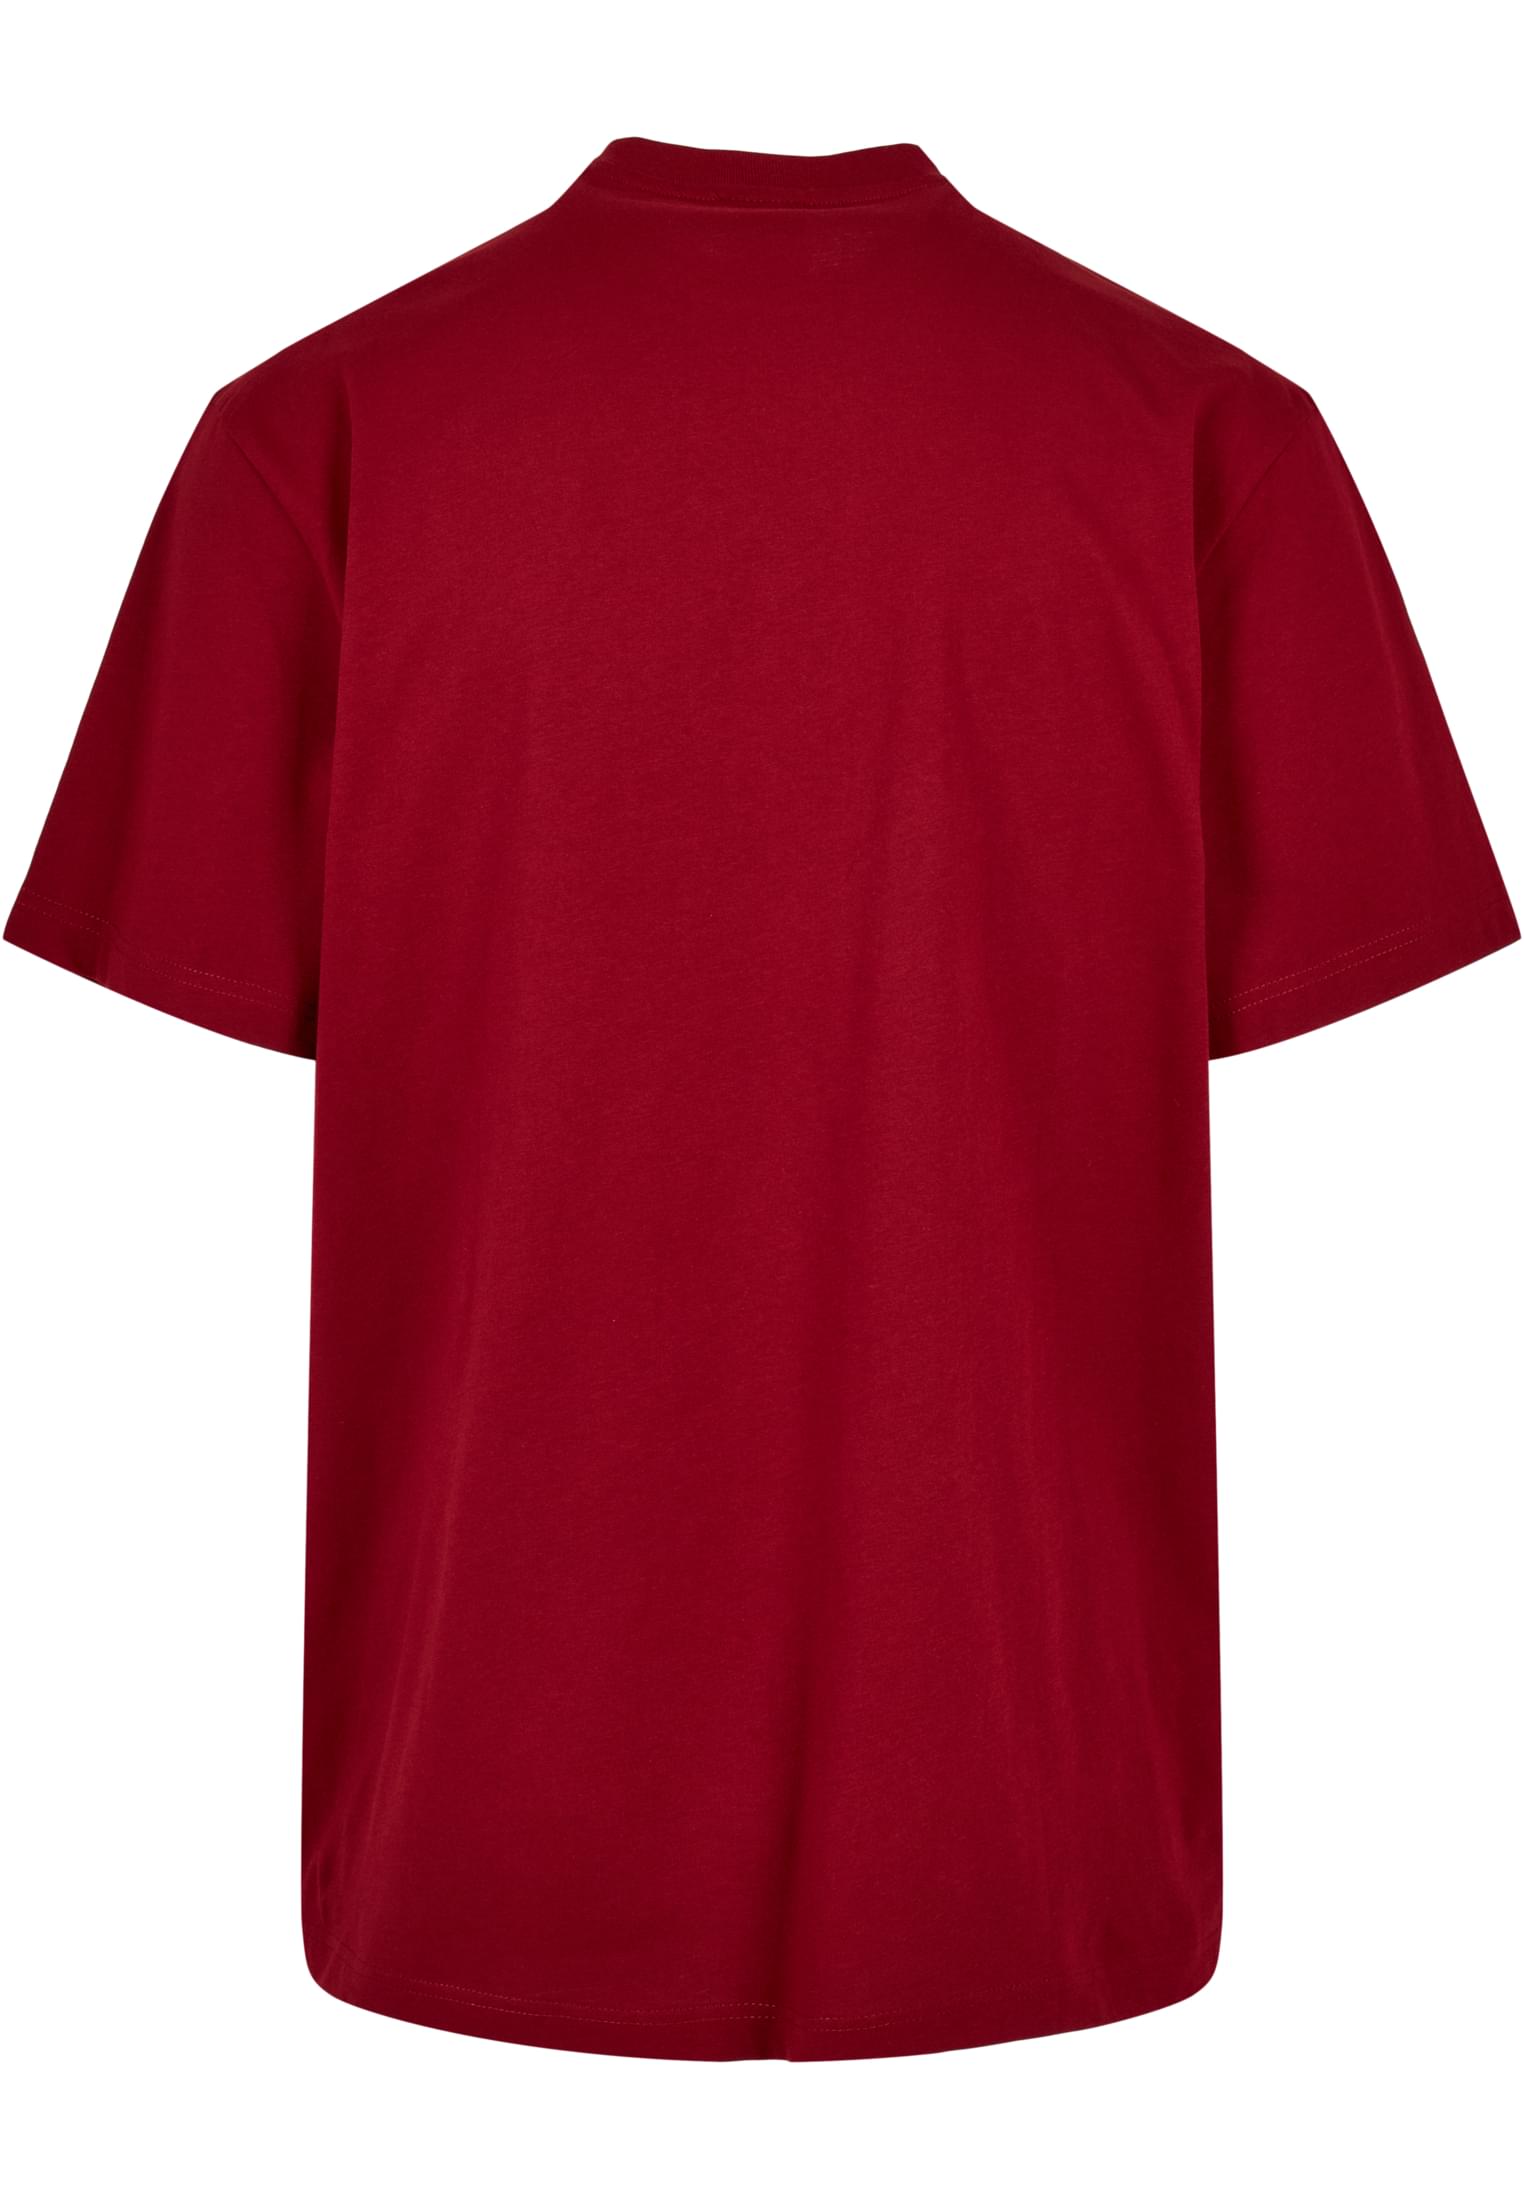 Plus Size Tall Tee in Farbe brickred